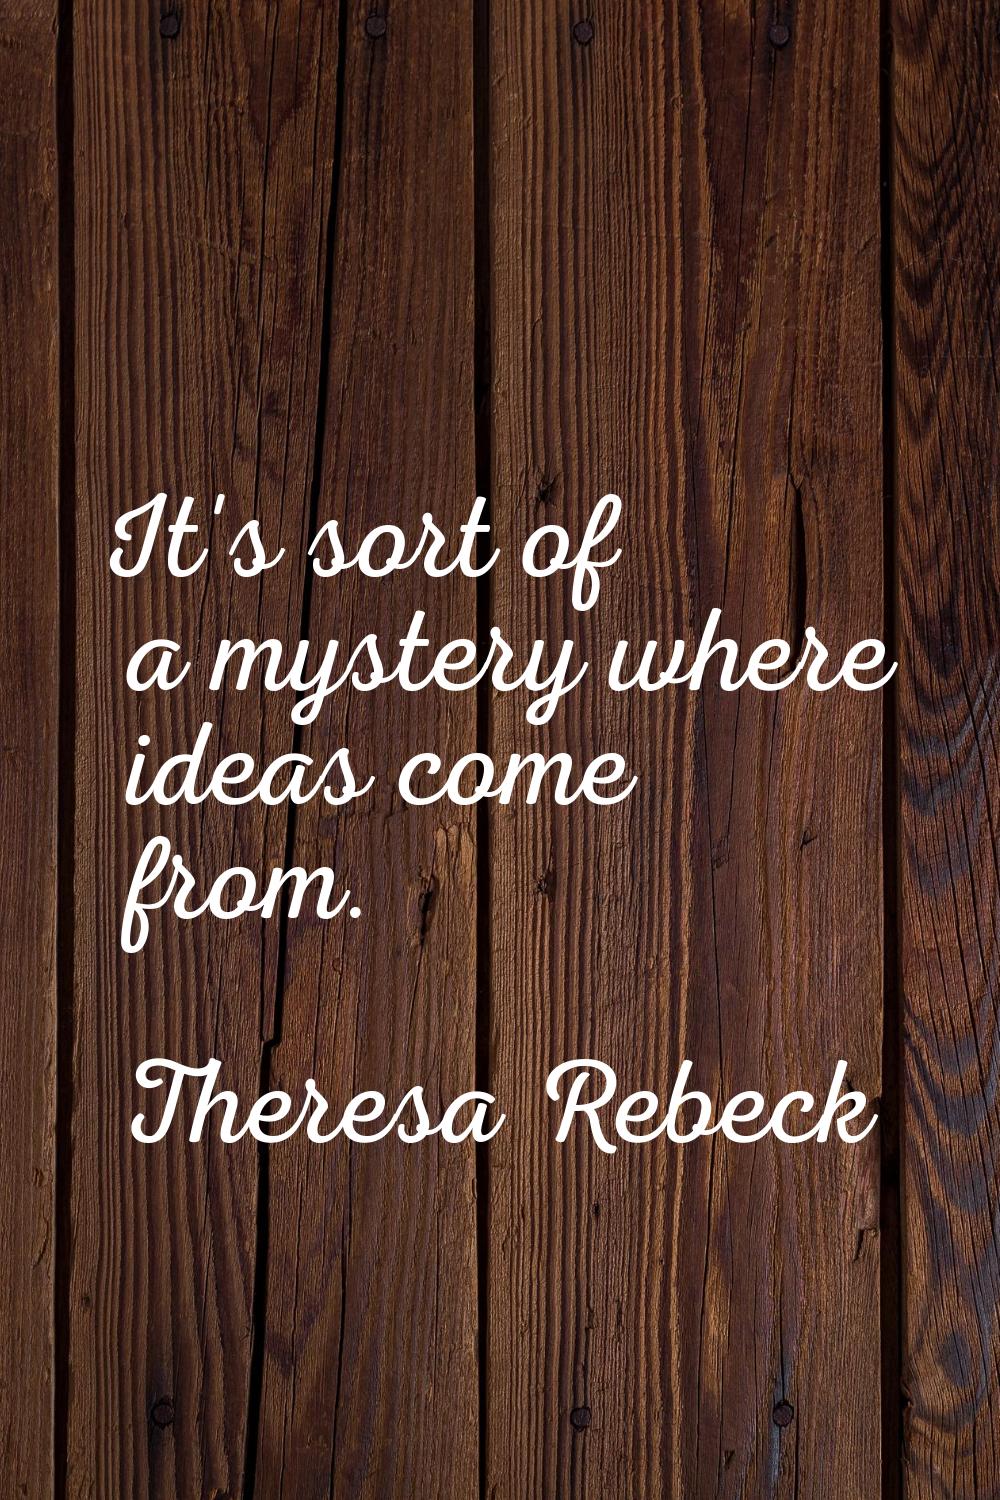 It's sort of a mystery where ideas come from.